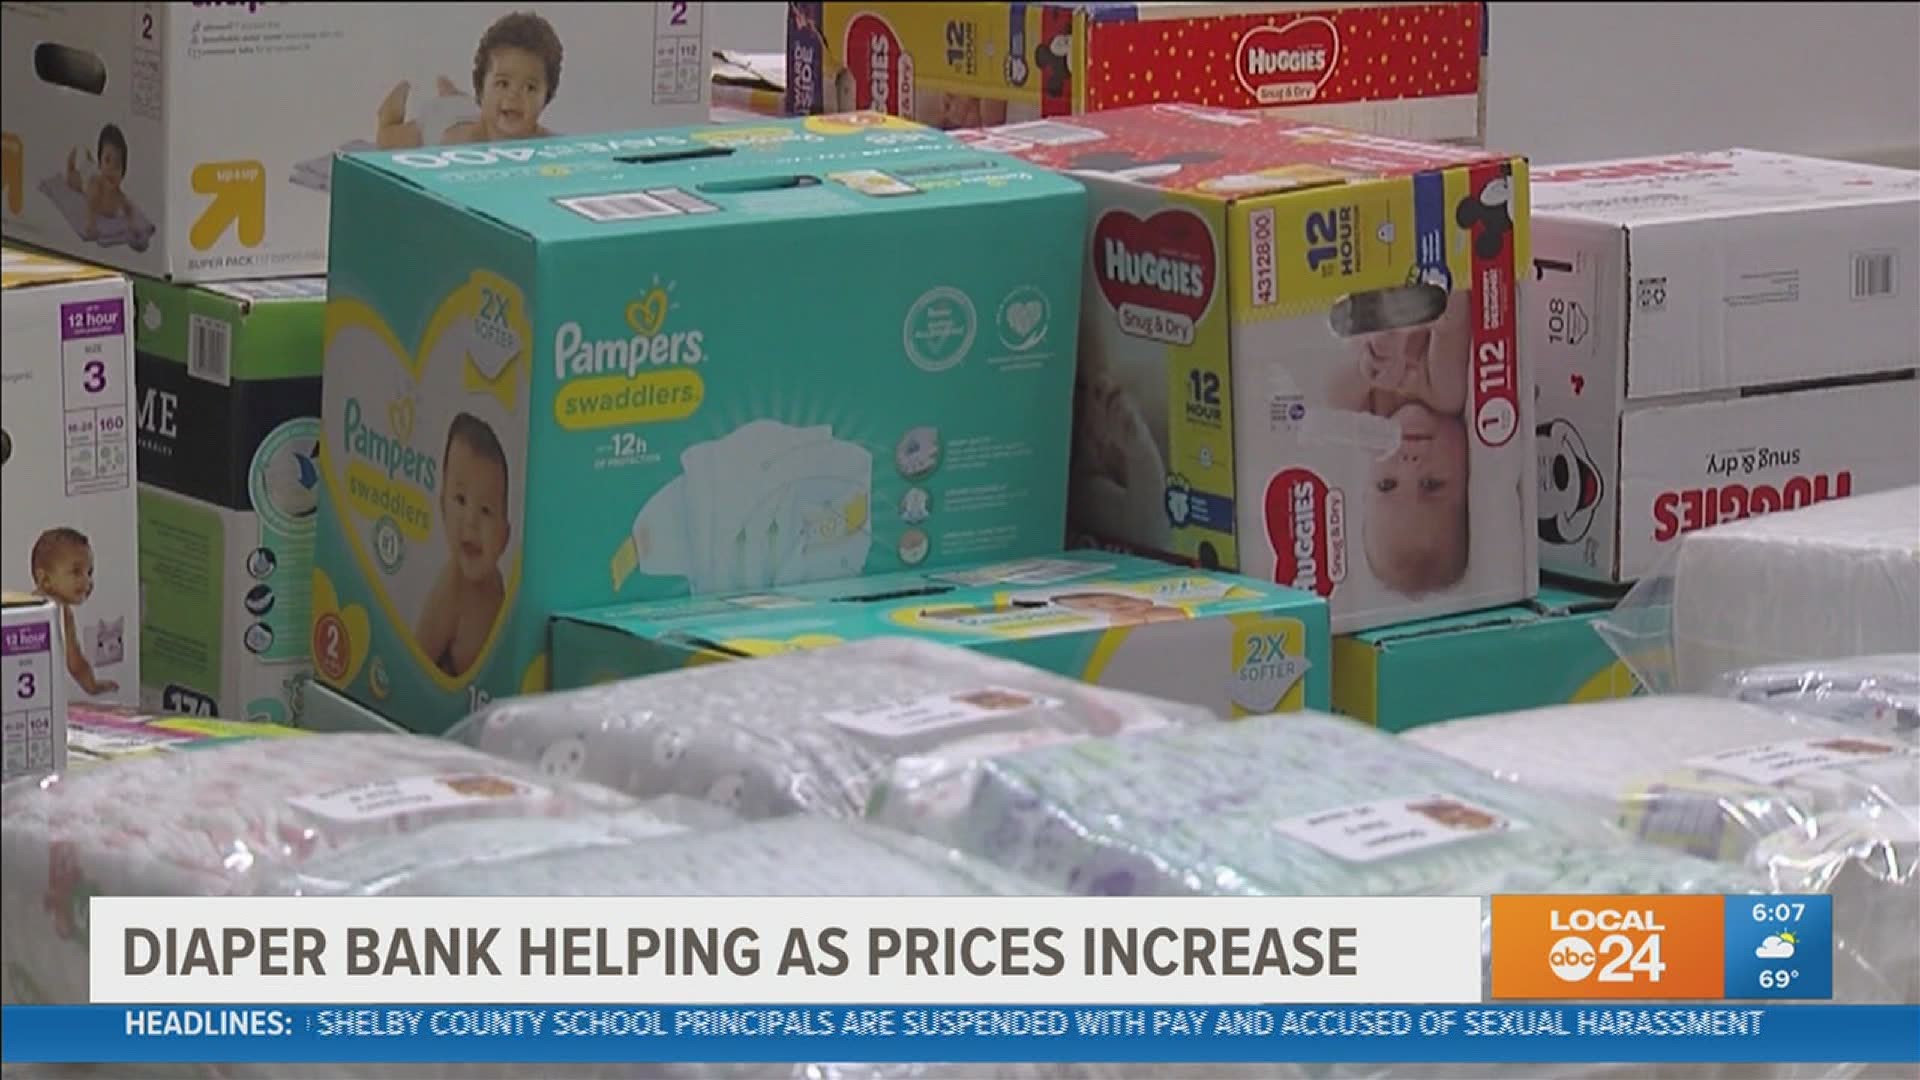 Diaper bank prepares for diaper prices to increase